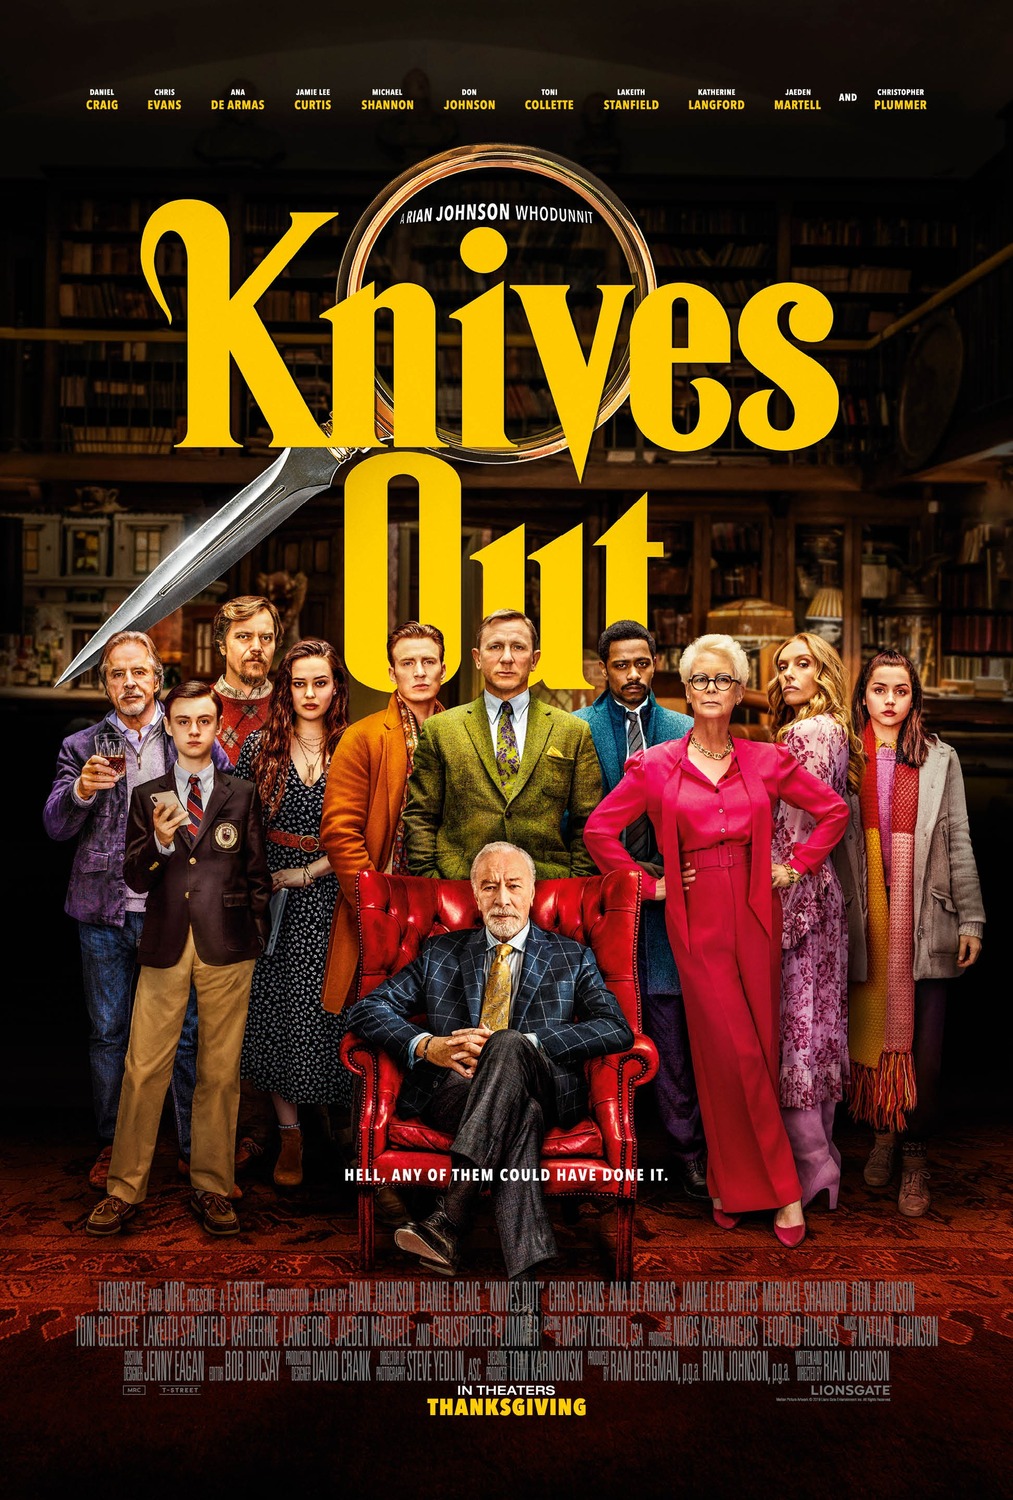 Knives Out - film poster - property of Lionsgate, Media Rights Capital, and T-Street - sourced from https://collider.com/knives-out-review-rian-johnson/